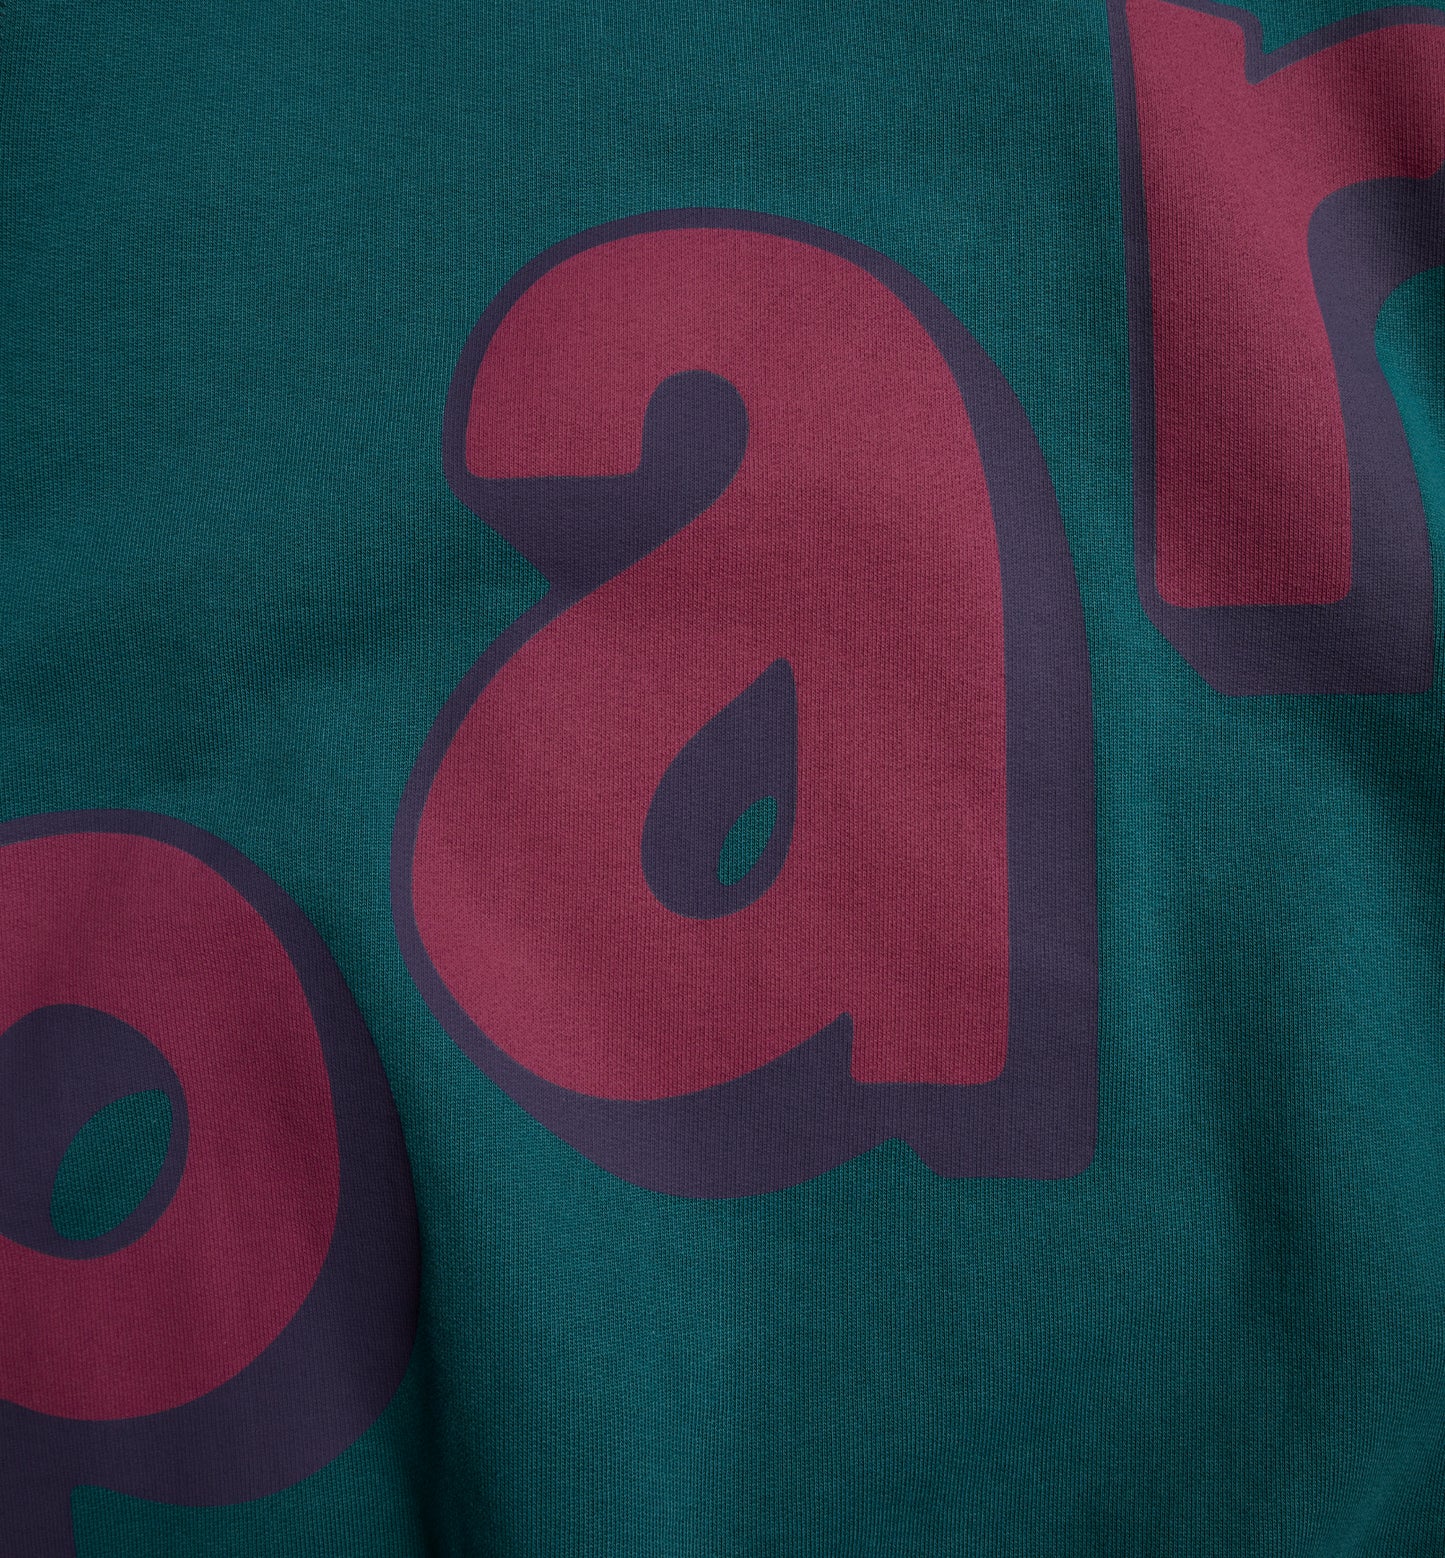 By Parra Loudness Crewneck Sweater Coralblue